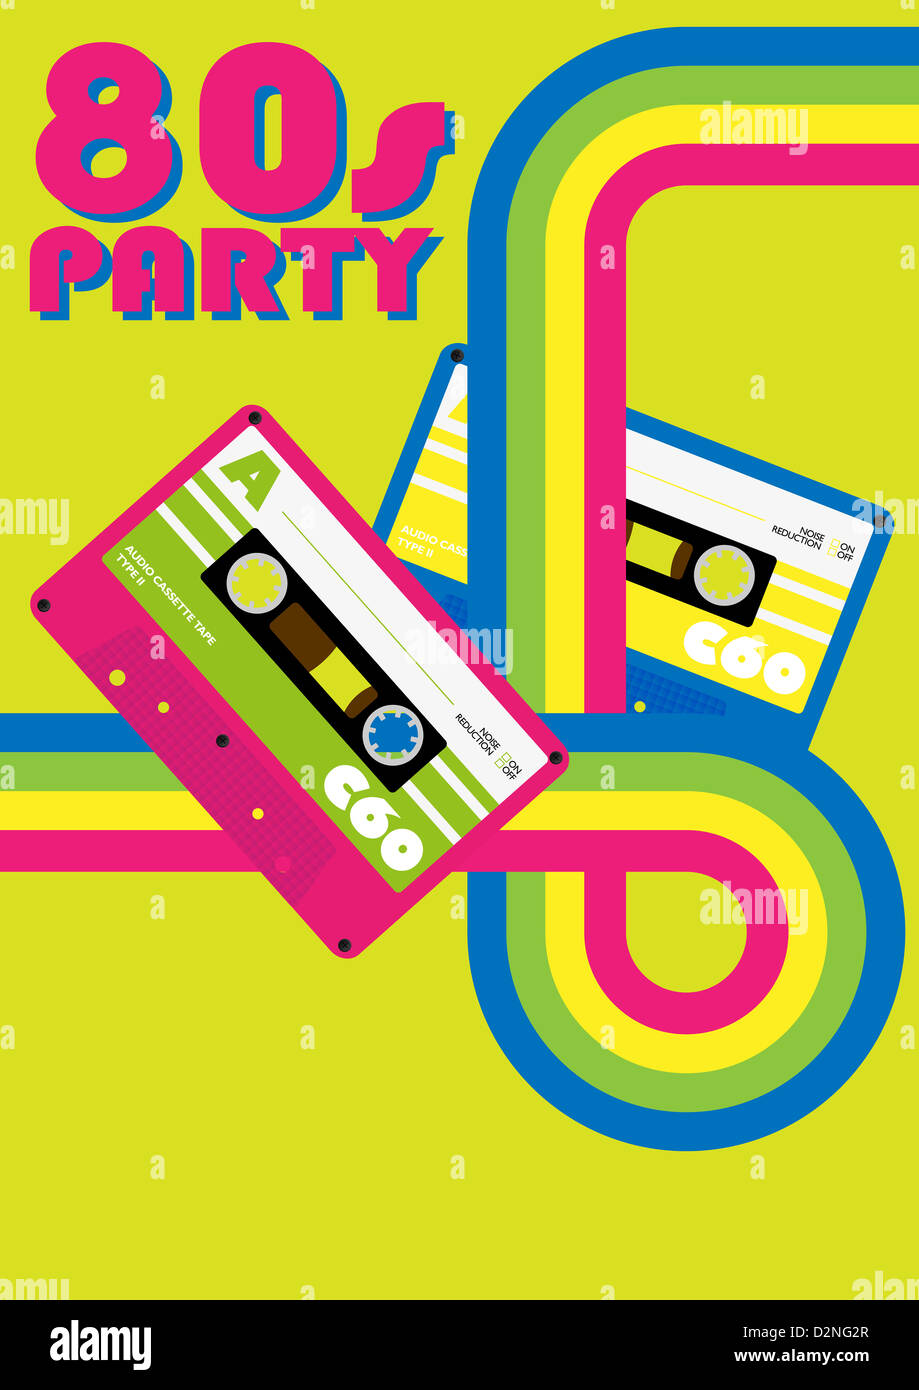 Retro Poster - 80s Party Flyer With Audio Cassette Tapes Stock Photo